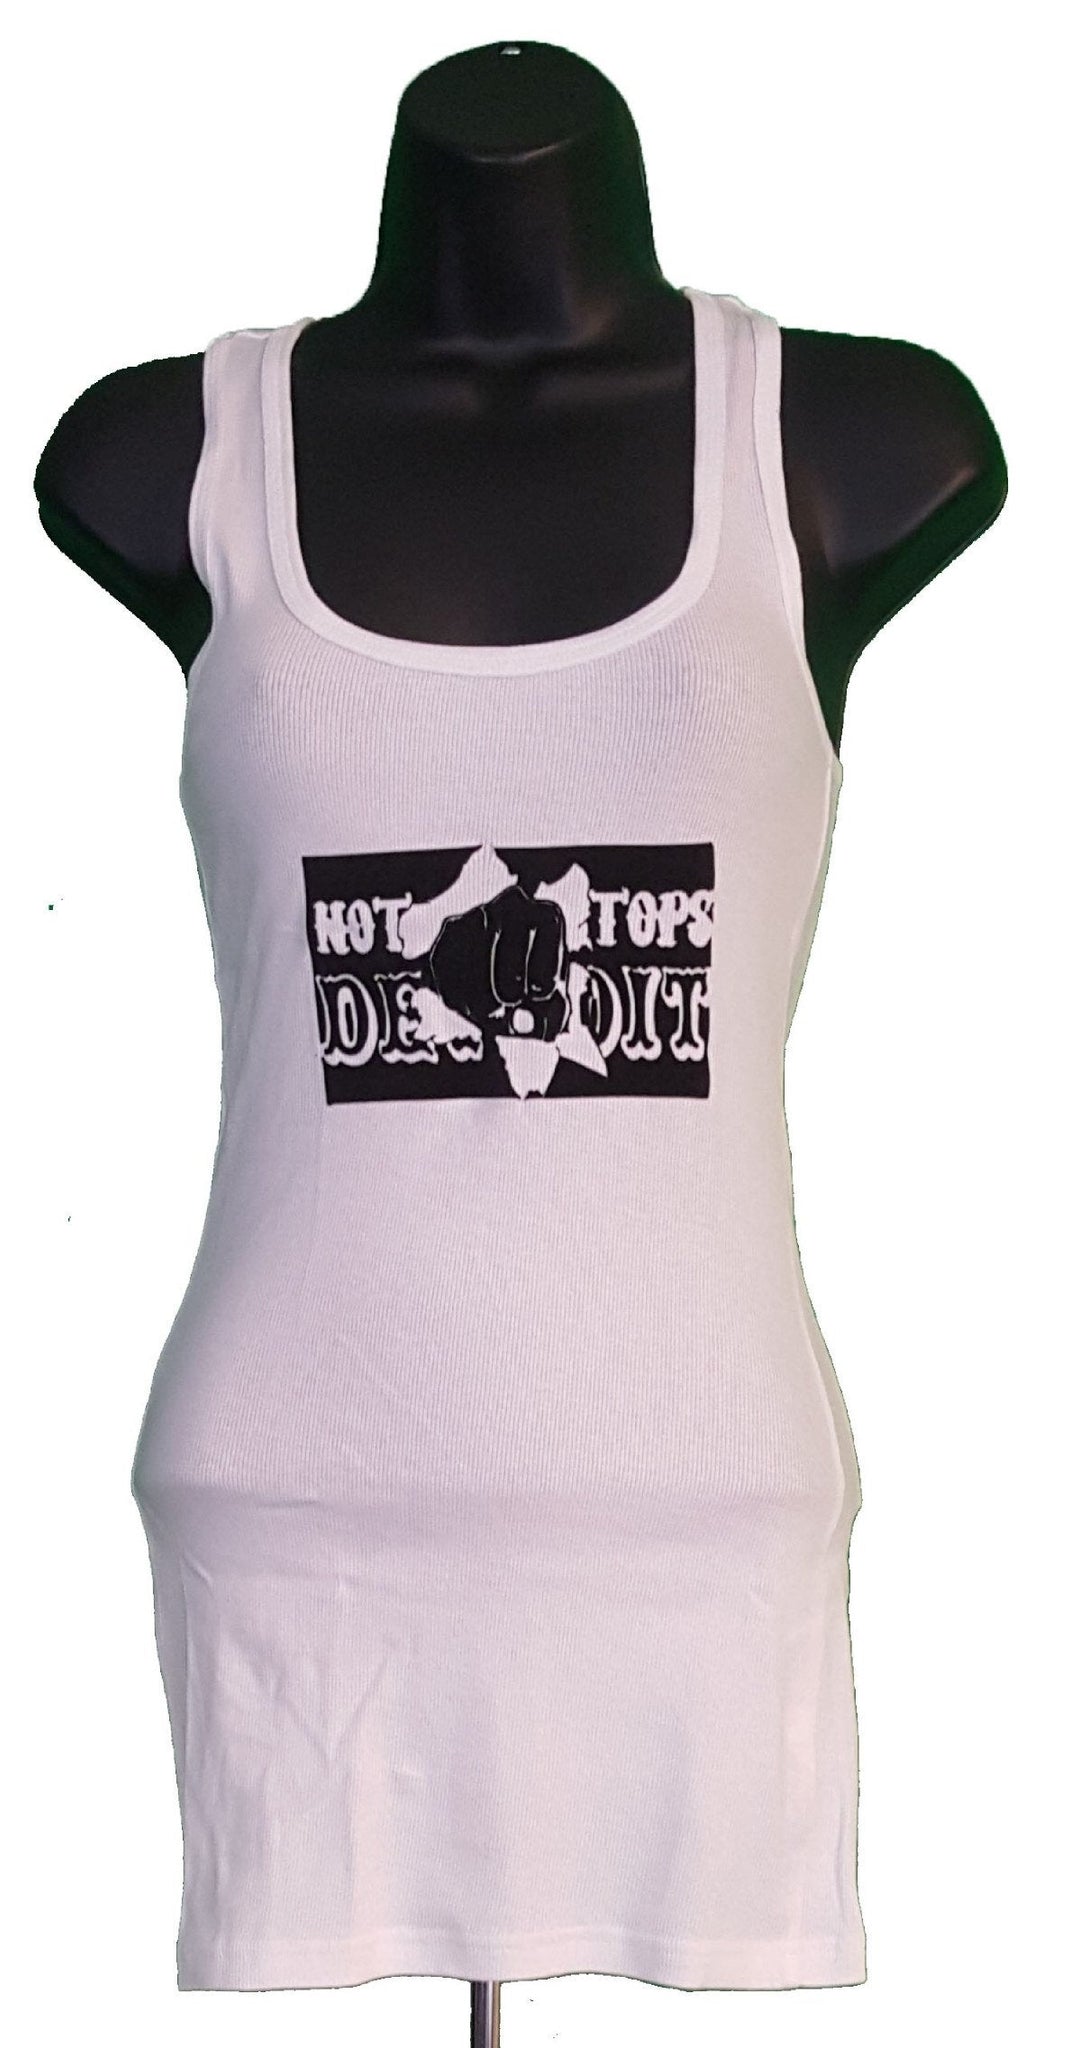 Nothing Stops Detroit Unisex White Fist Thru The Wall Tank Top